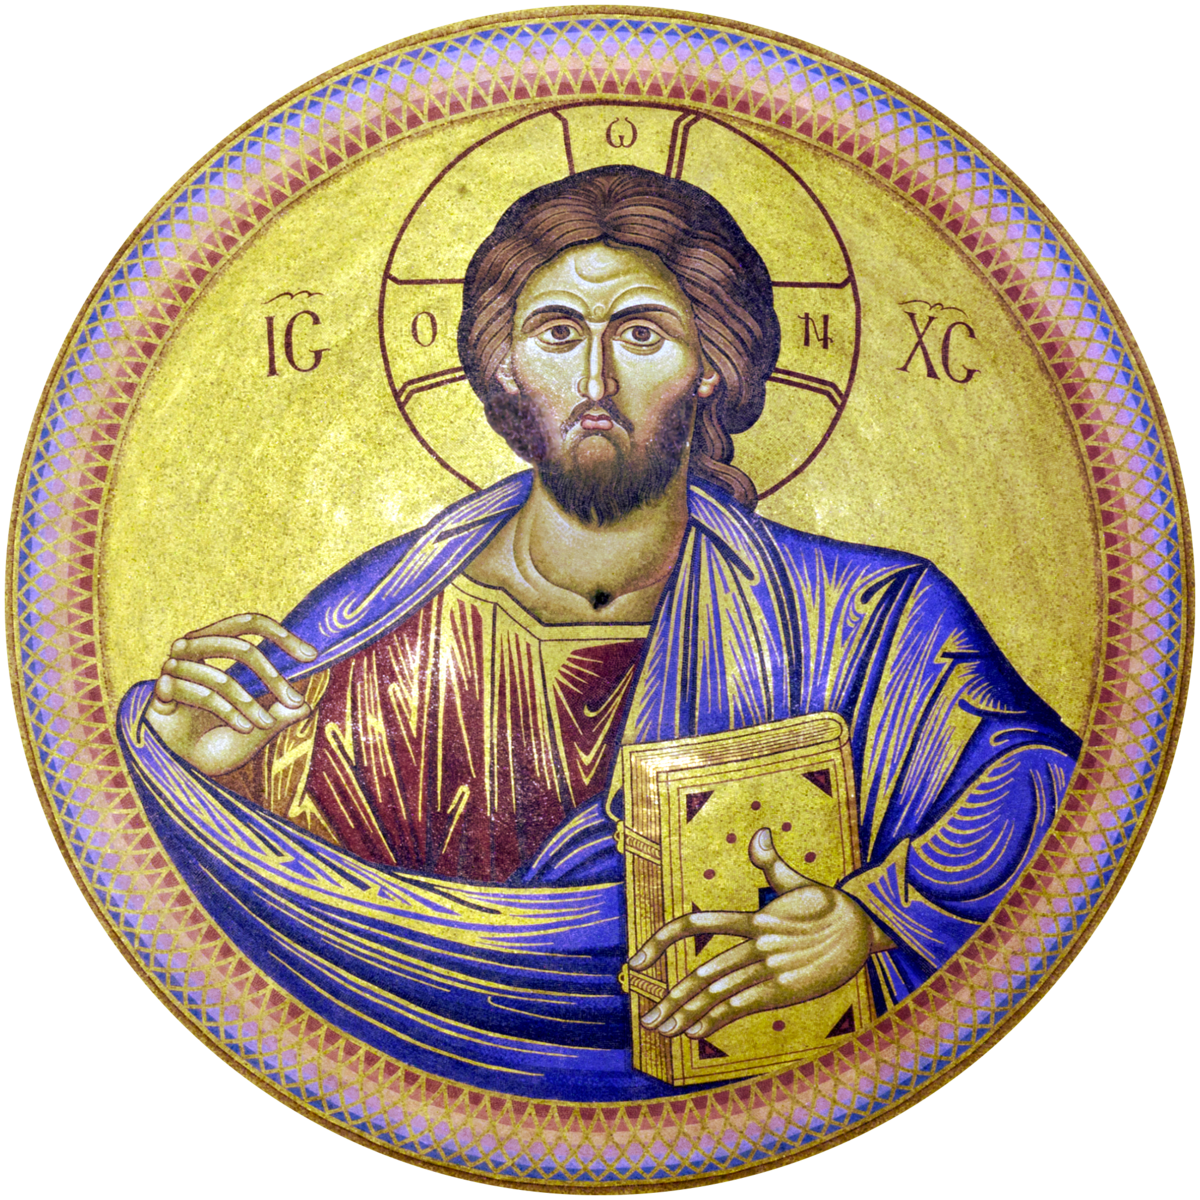 1200px-Christ_Pantocrator,_Church_of_the_Holy_Sepulchre.png